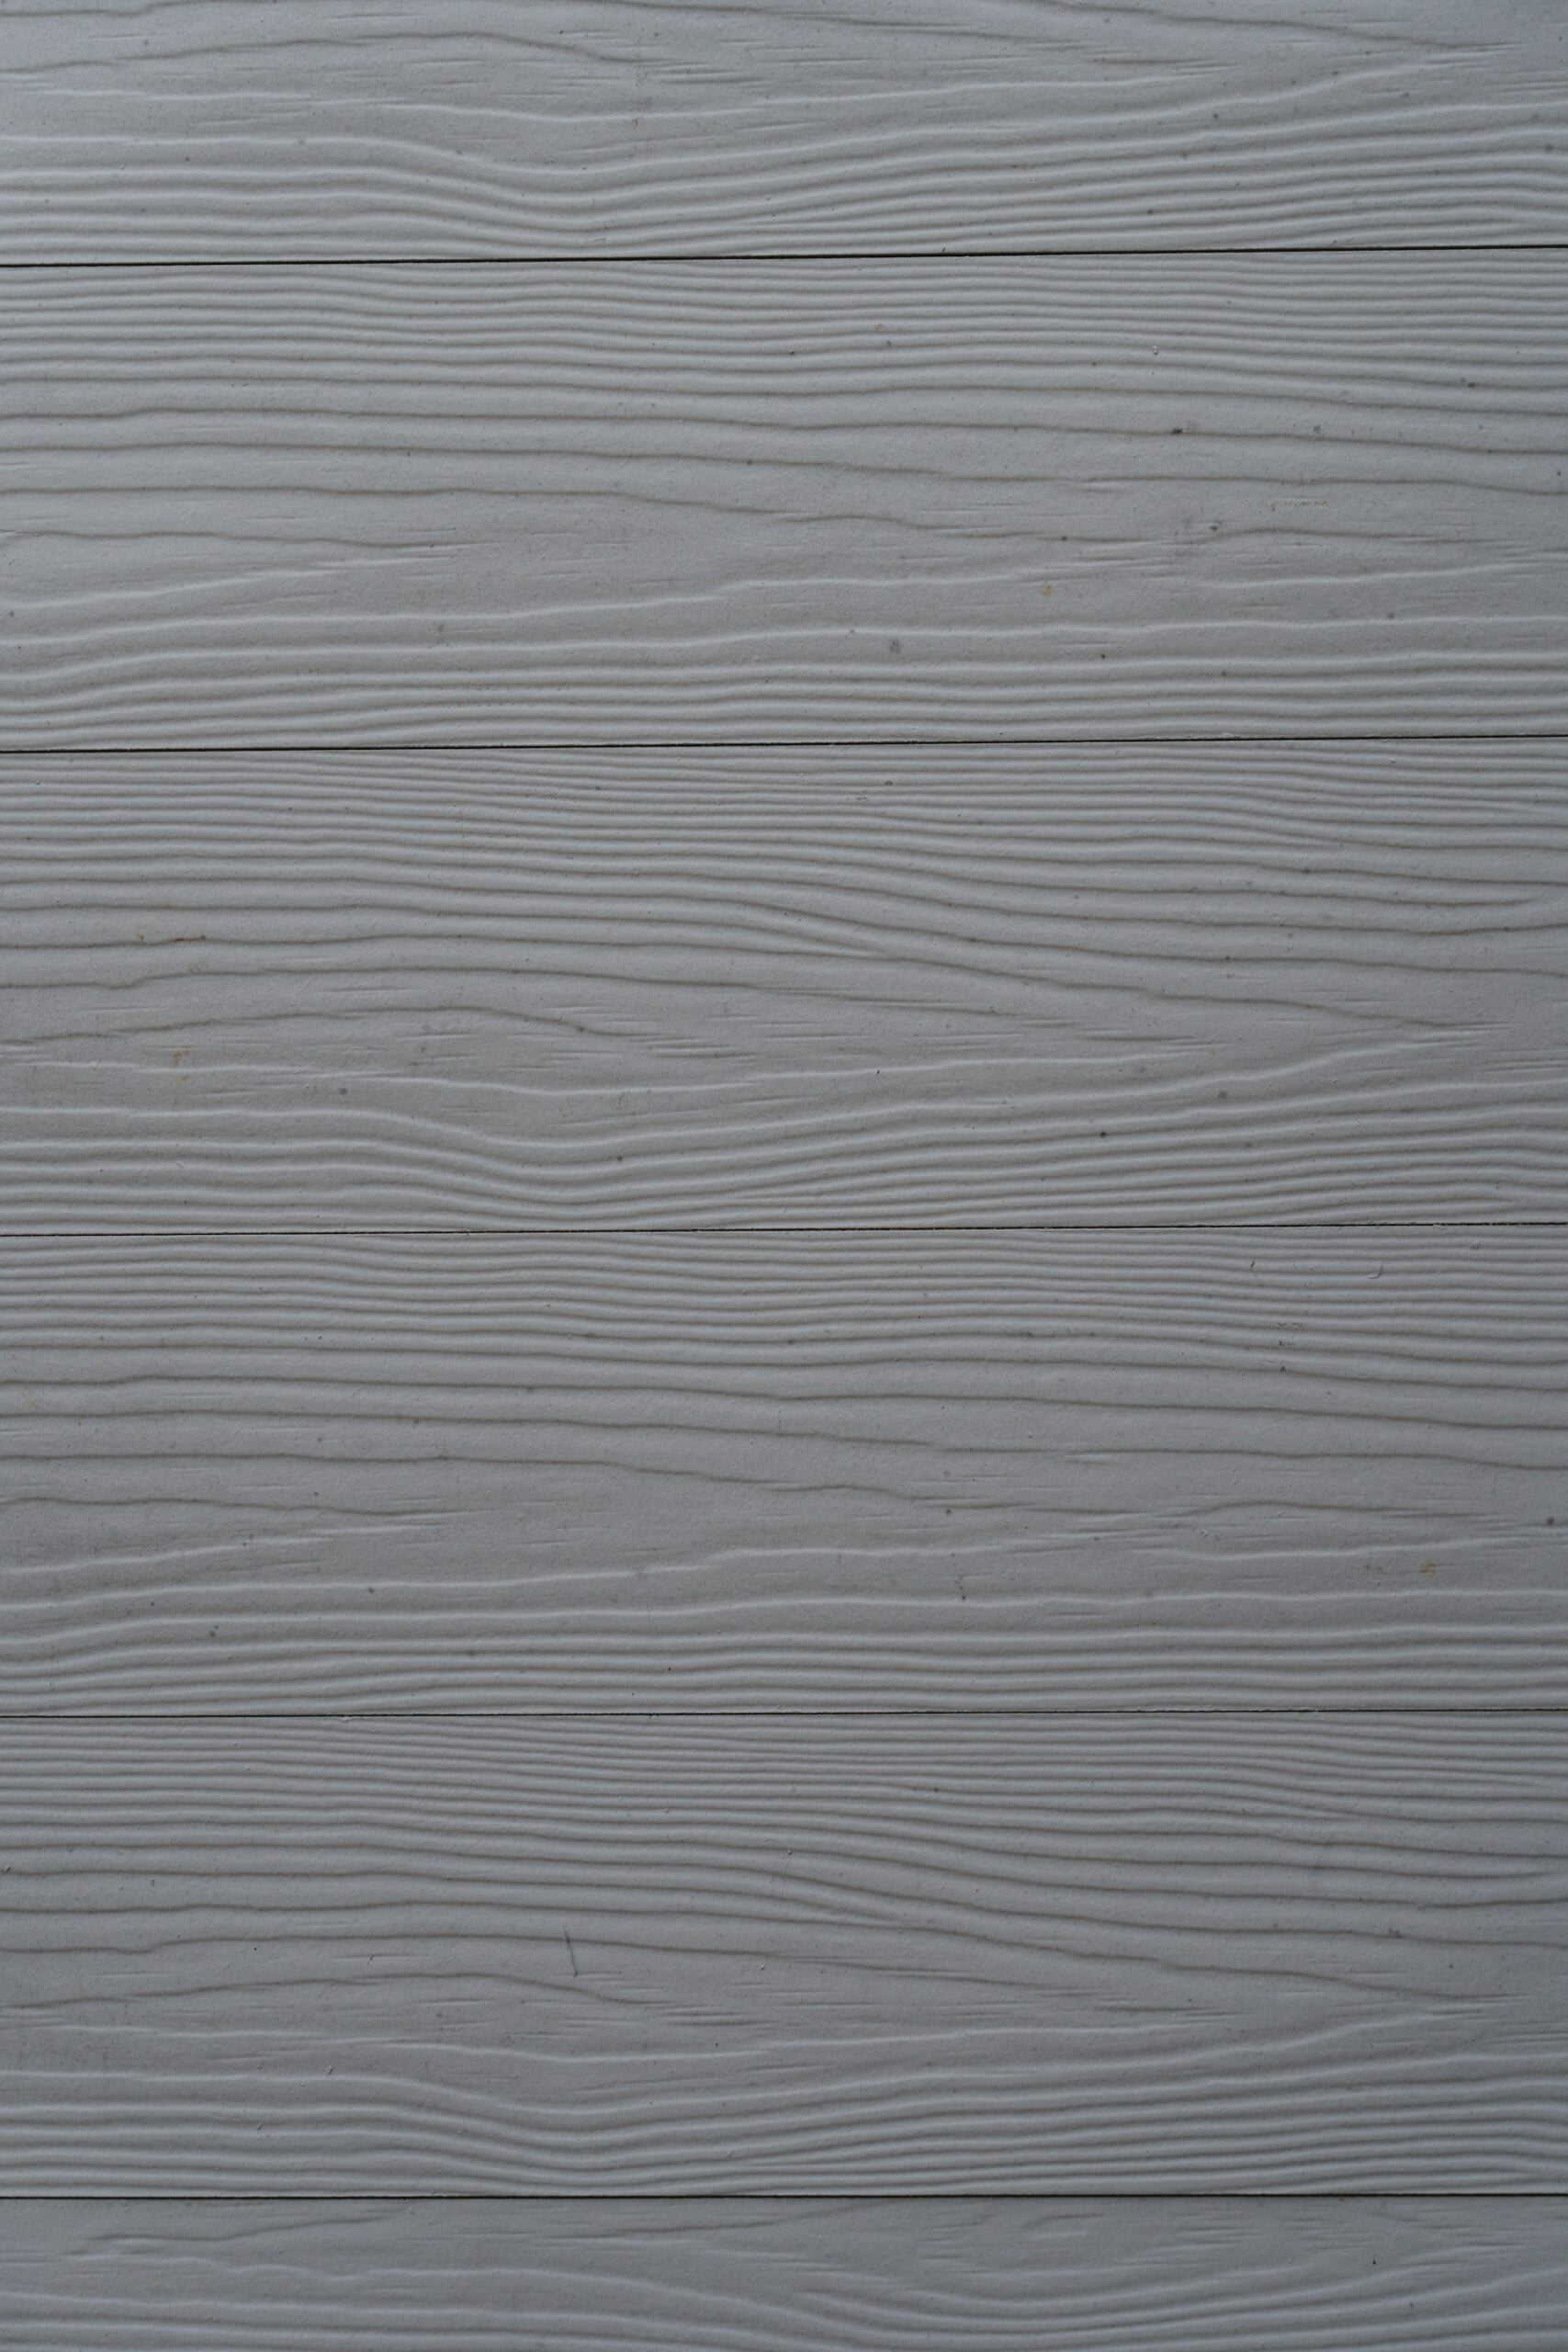 Understanding the Durability and Appeal of Fiber Cement Siding